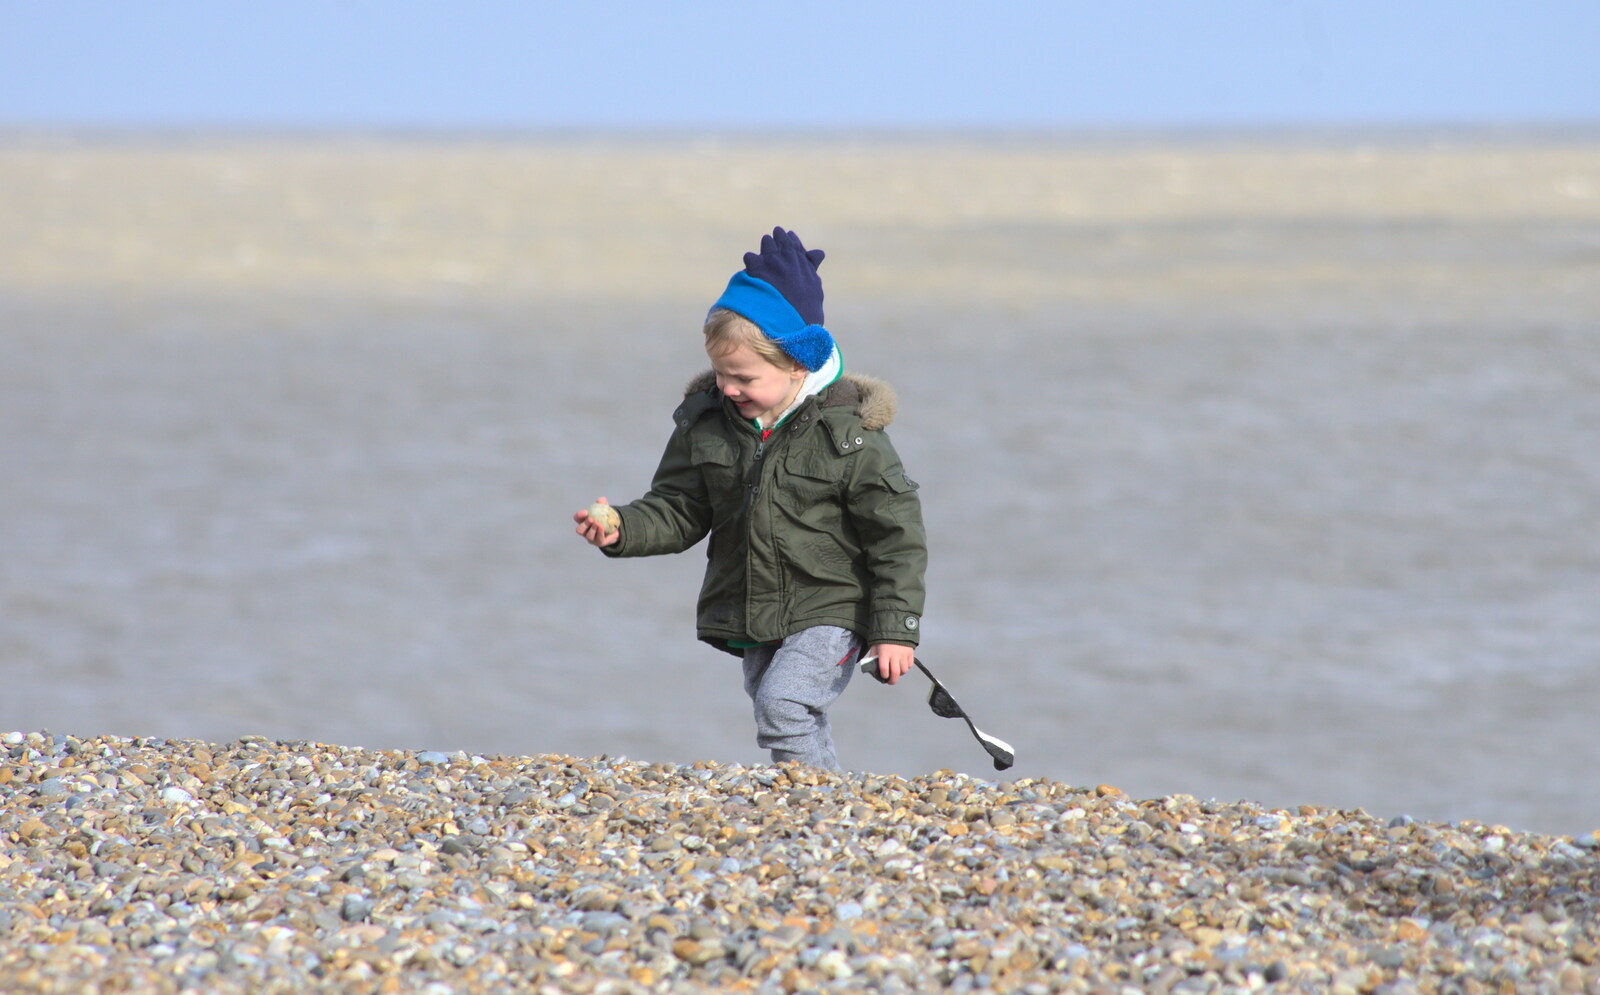 Harry stomps around from A Trip to Aldeburgh, Suffolk - 7th February 2016